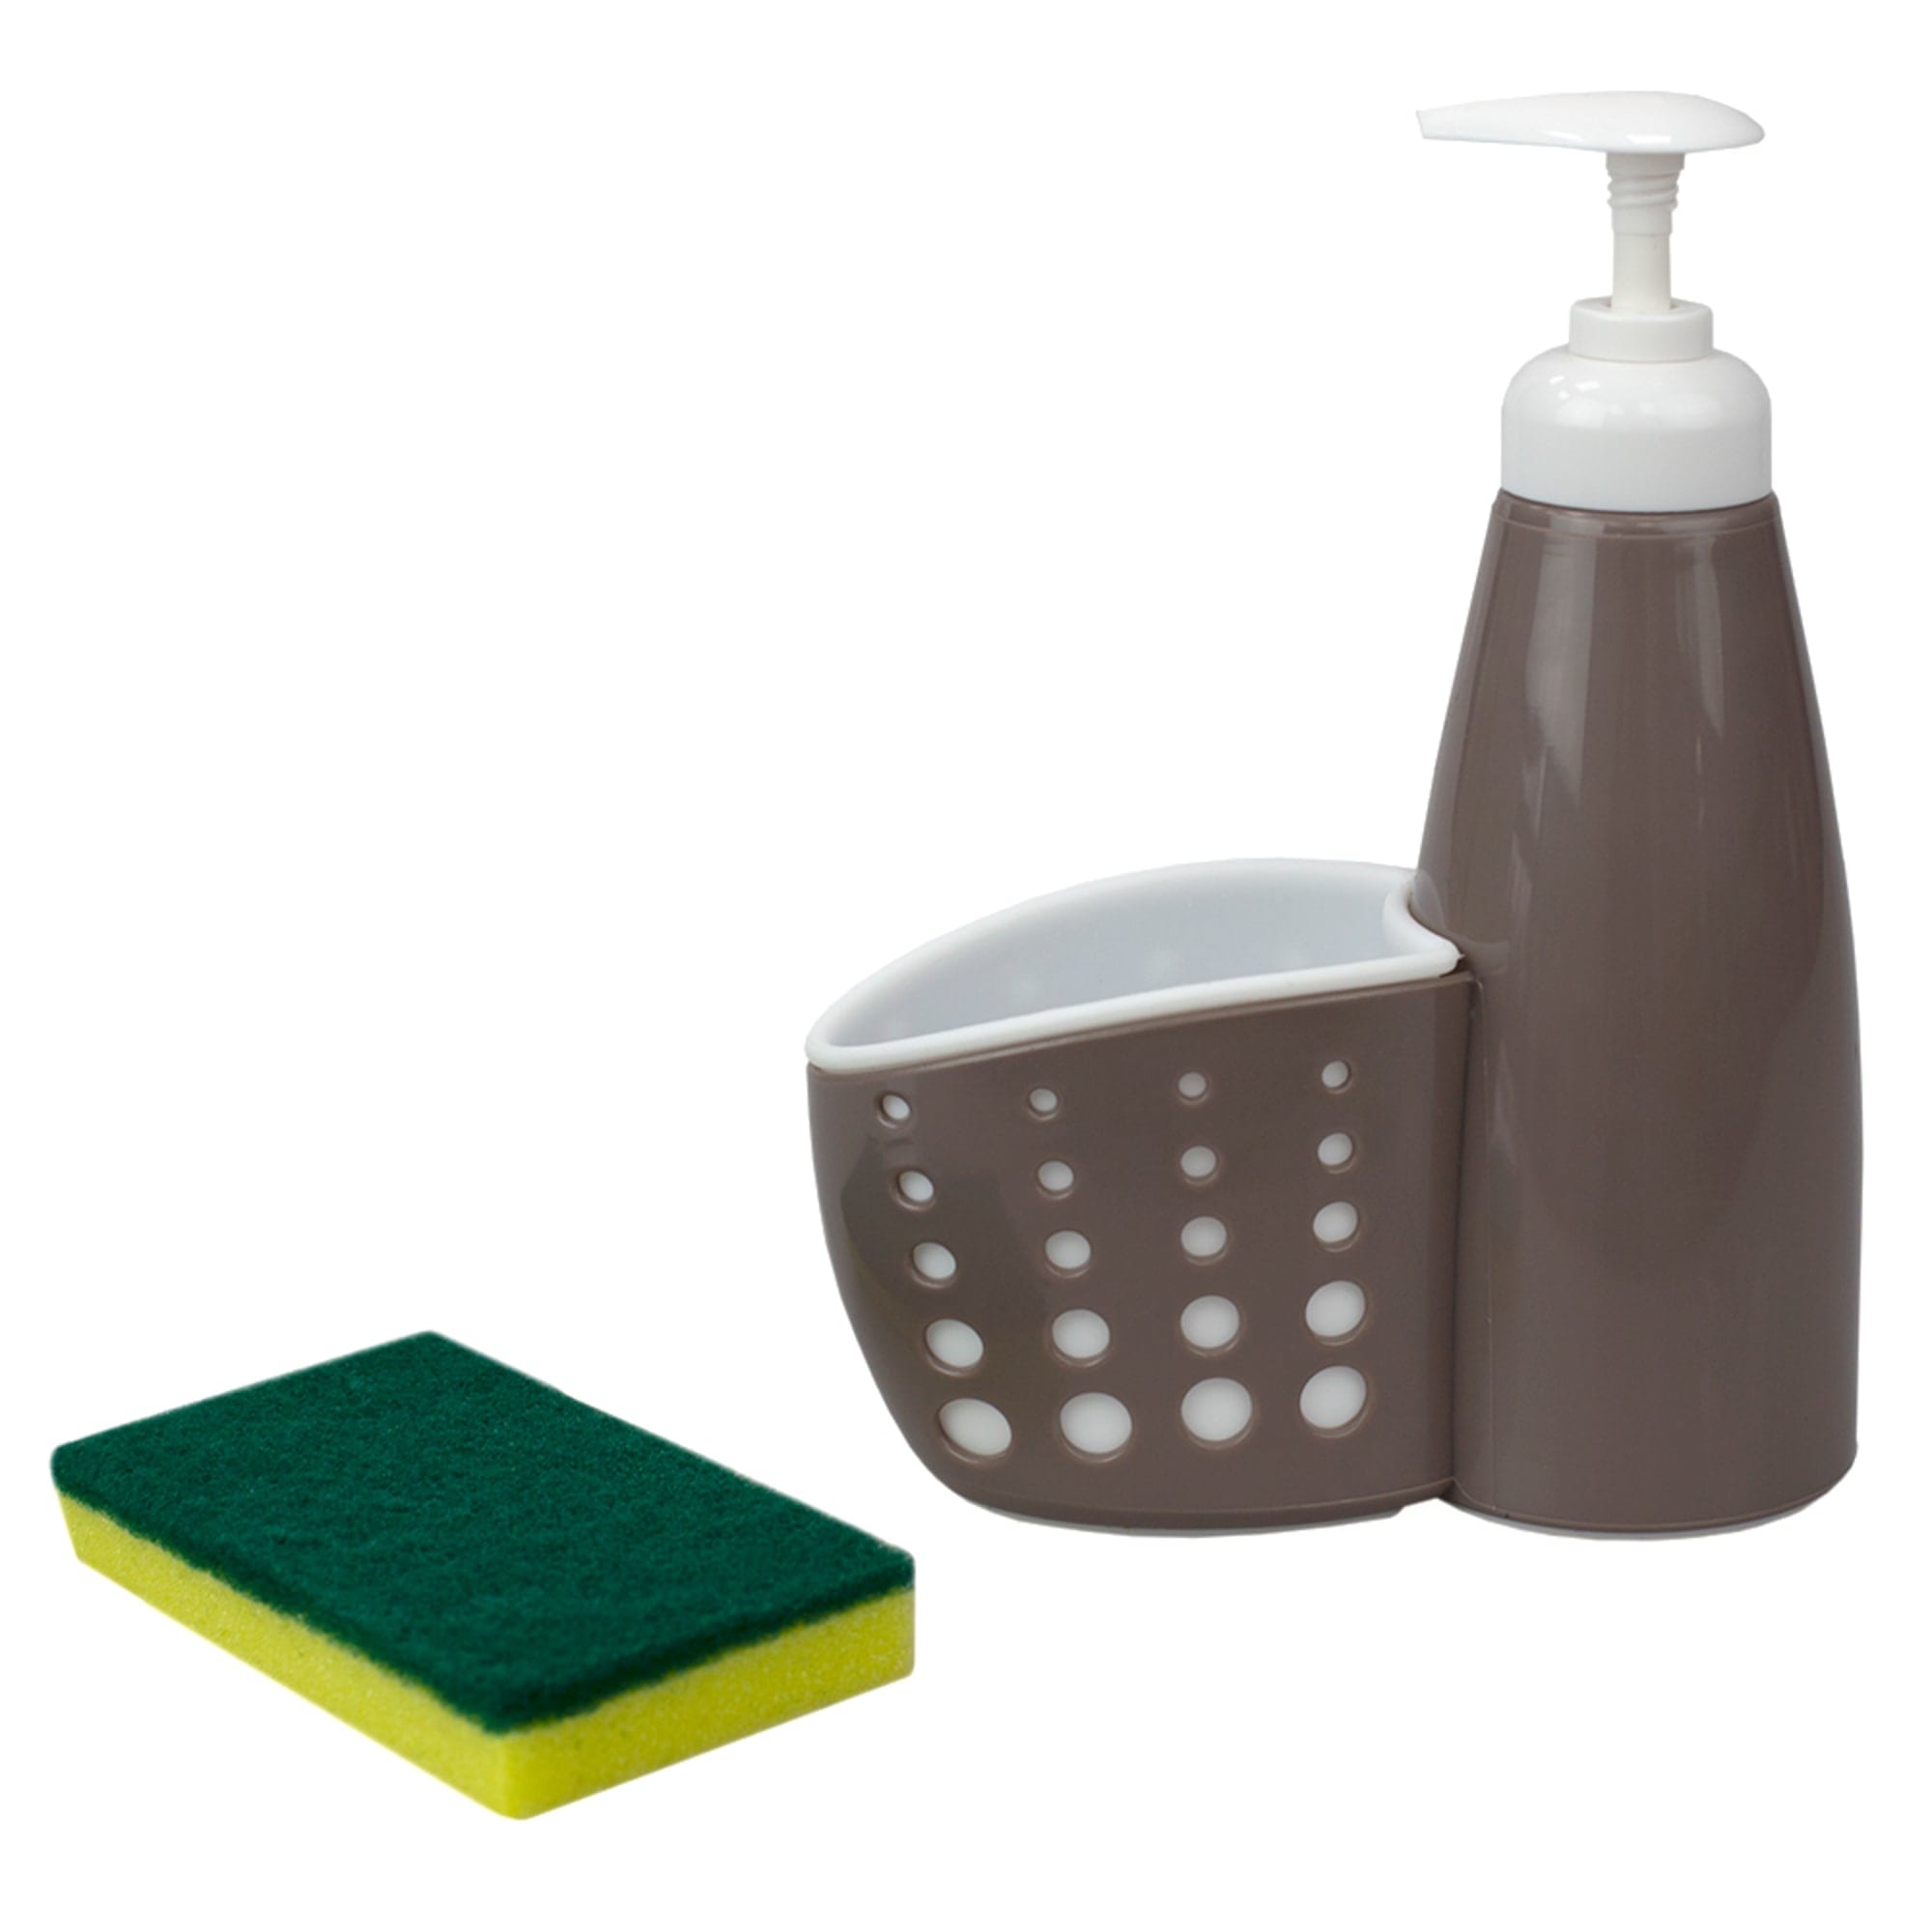 Home Basics Soap Dispenser with Perforated Sponge Holder, Grey $3.00 EACH, CASE PACK OF 24